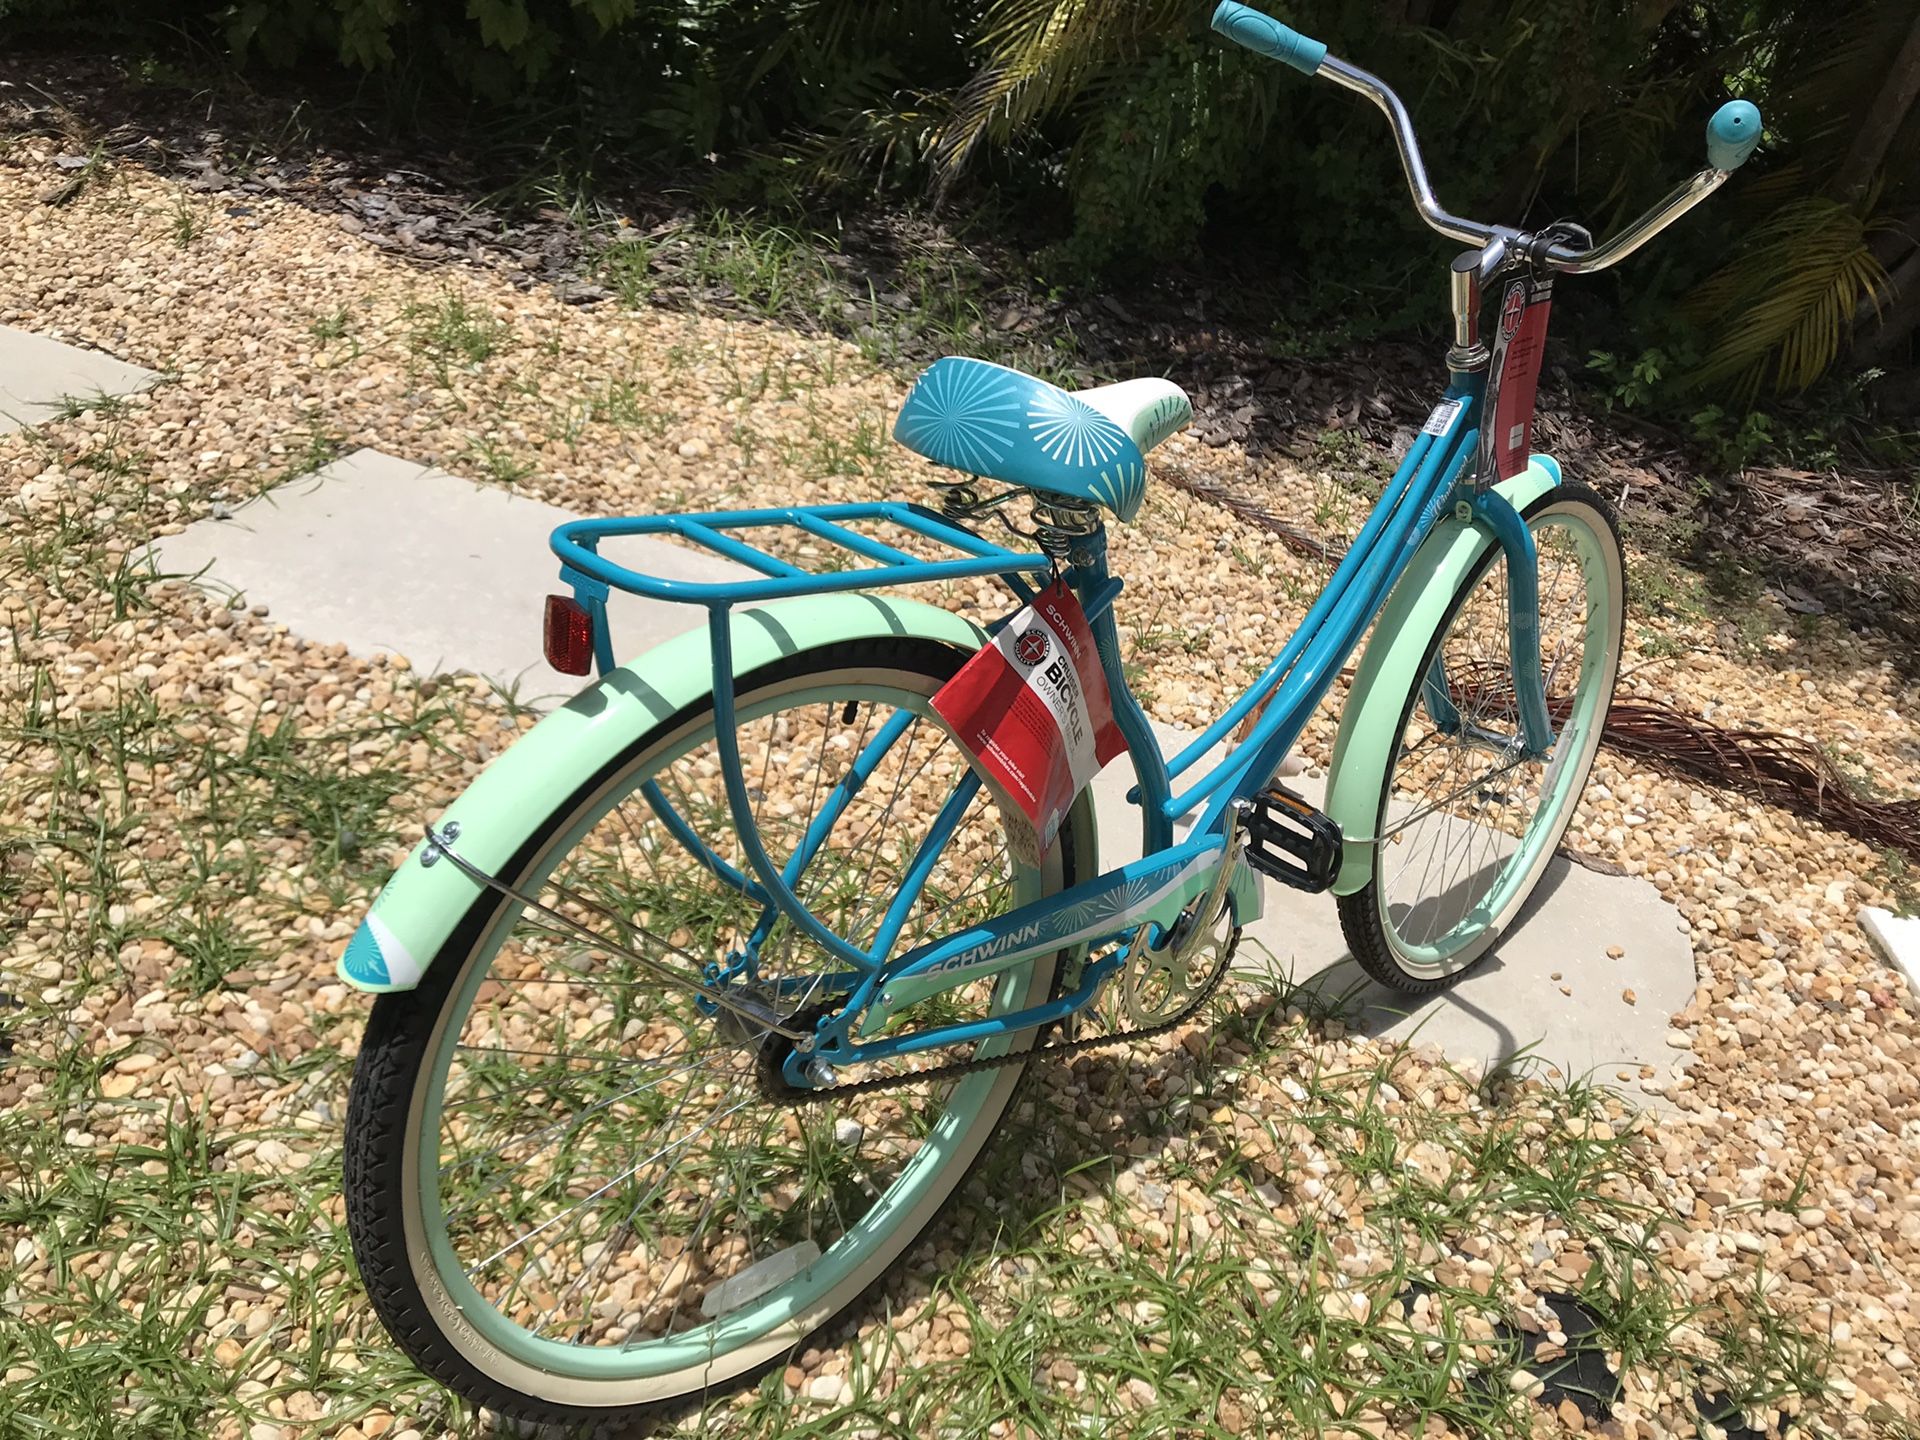 Schwinn cruiser bicycle (brand new) paid 130.00 steal of a deal .. beautiful color and just in time for fall bike riding